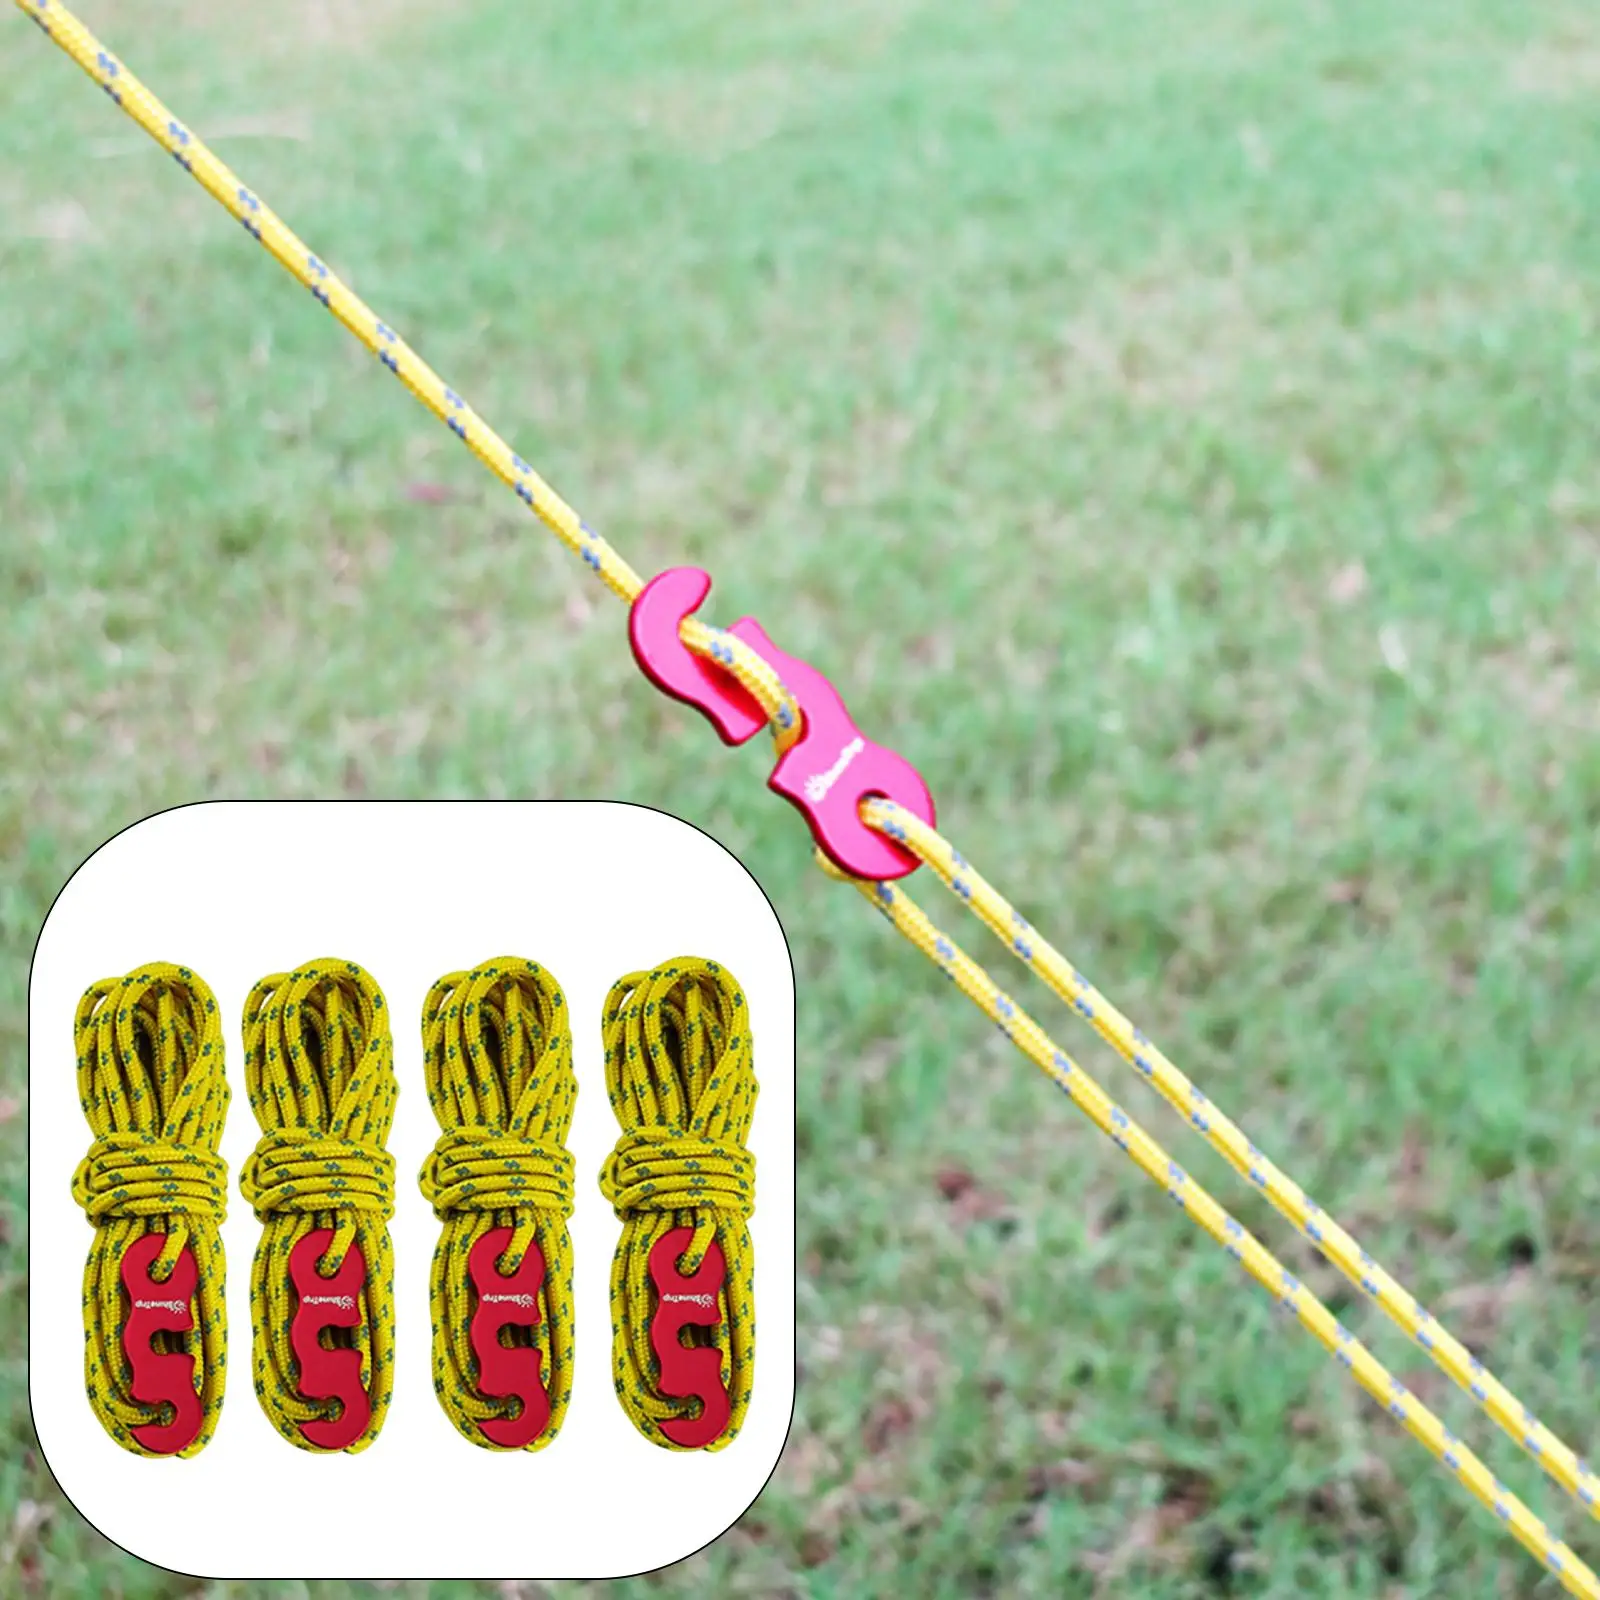 4x  Rope with S Tensioner High Strength for Tying Down Tarp Camping 